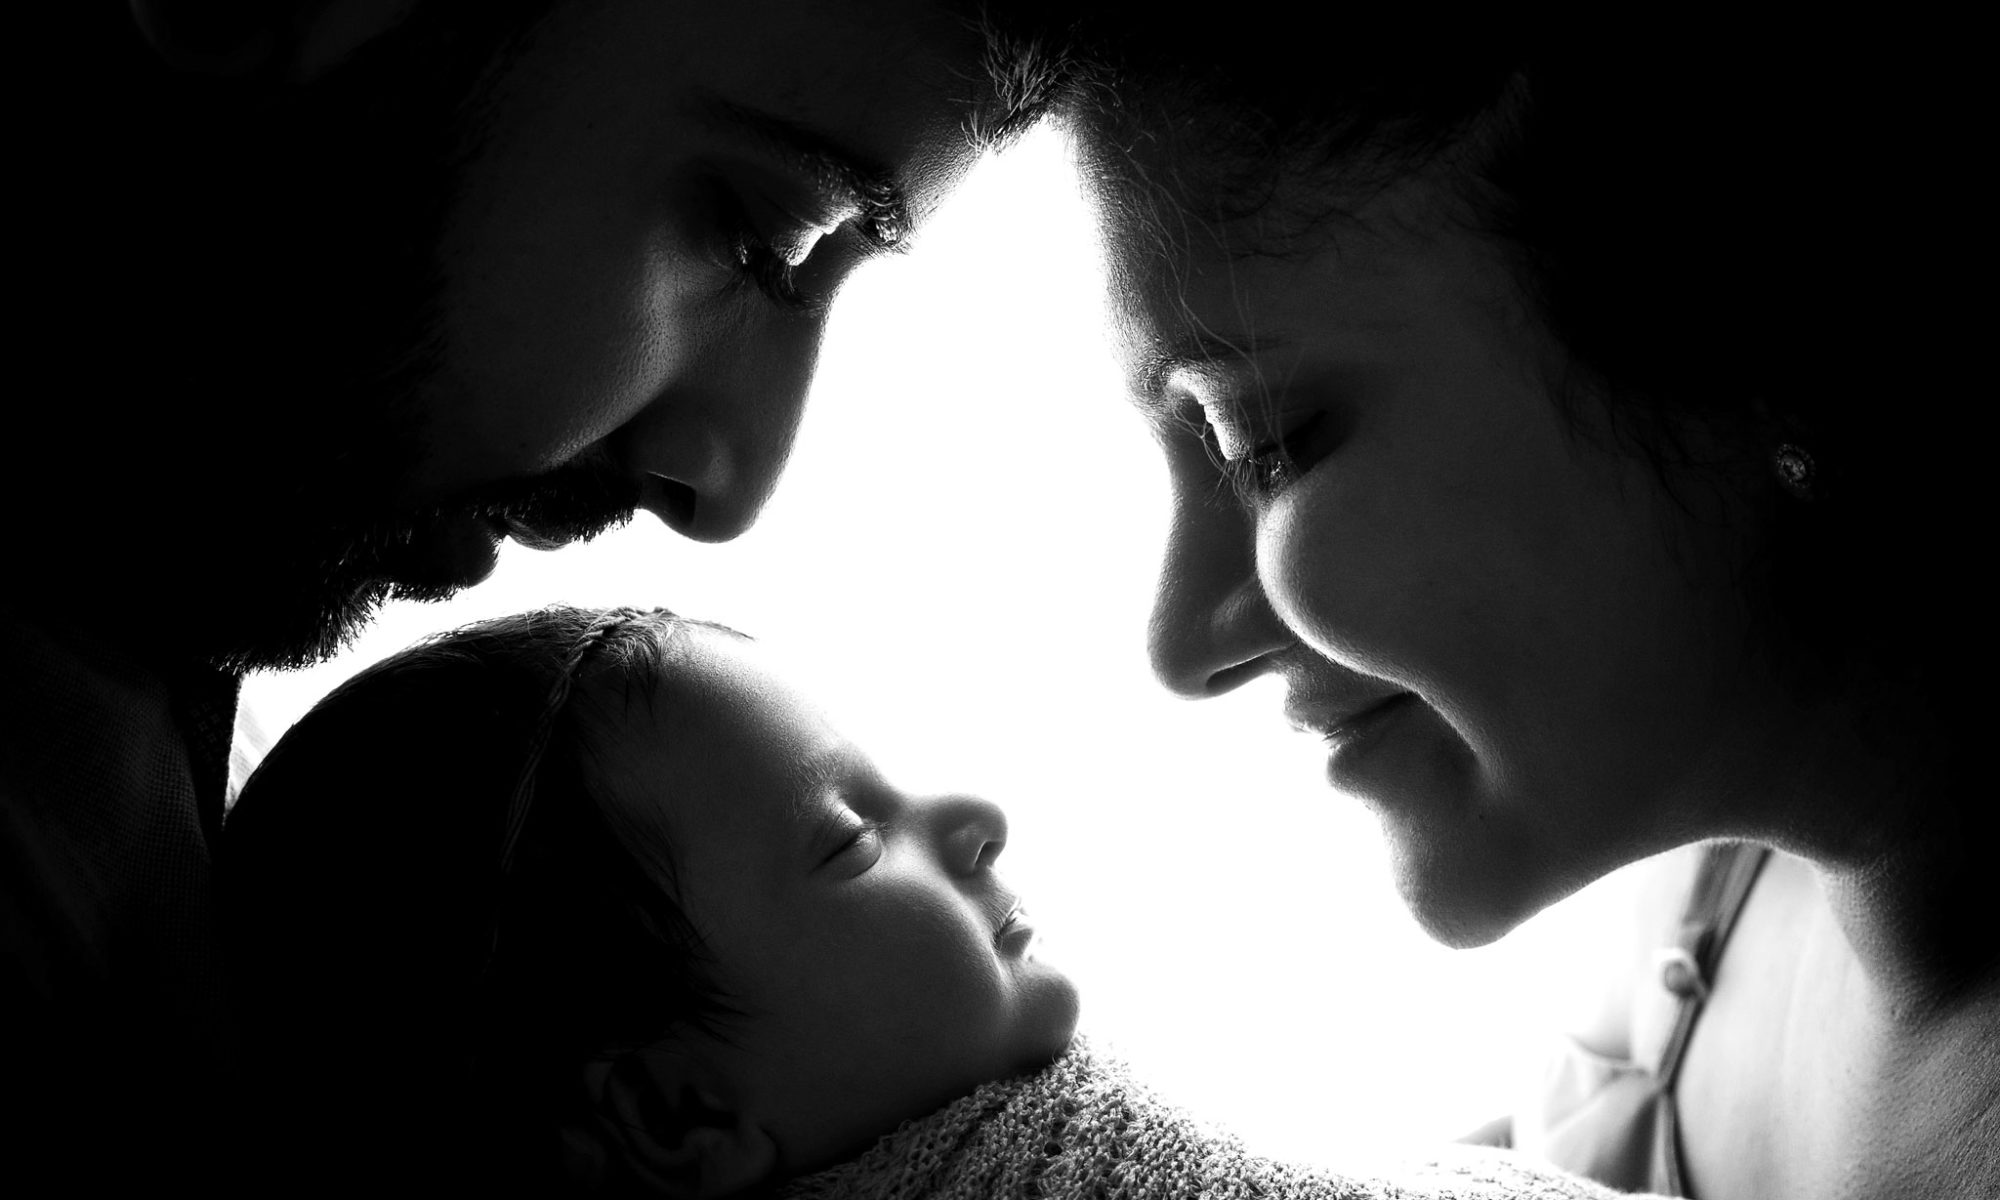 Black and white family silhouette